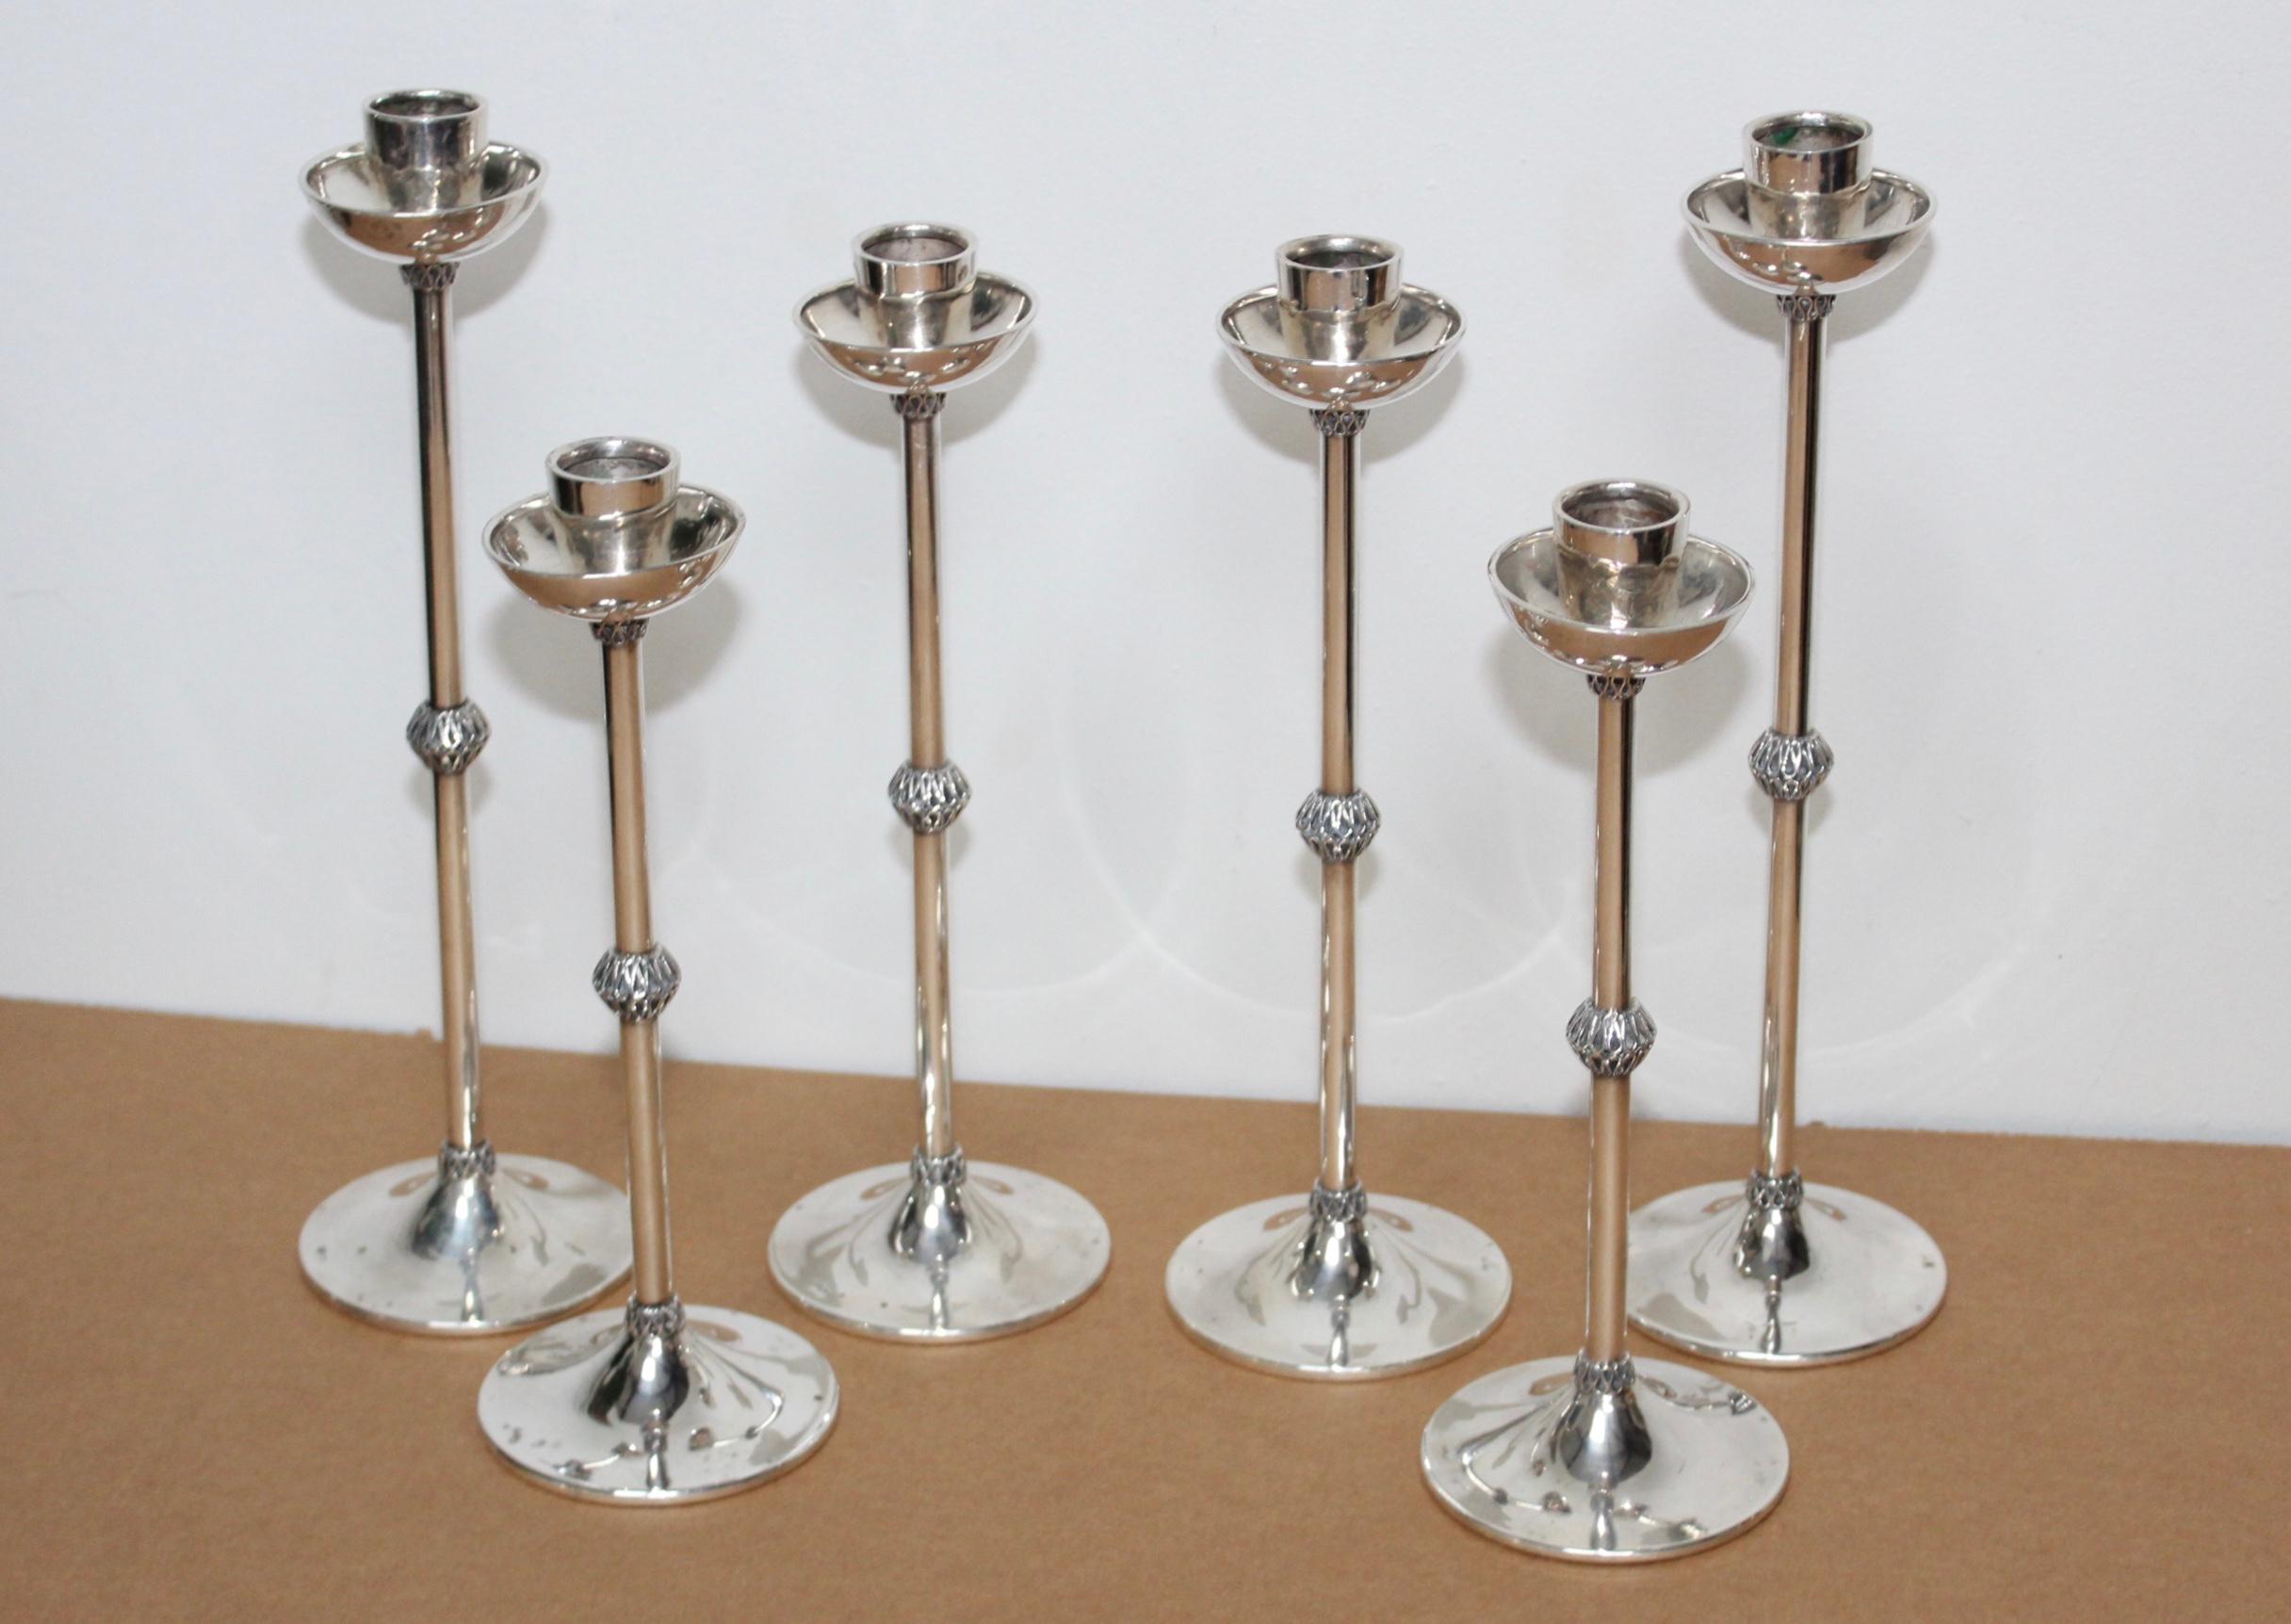 1940s Art Deco Sterling Silver Candlesticks 5